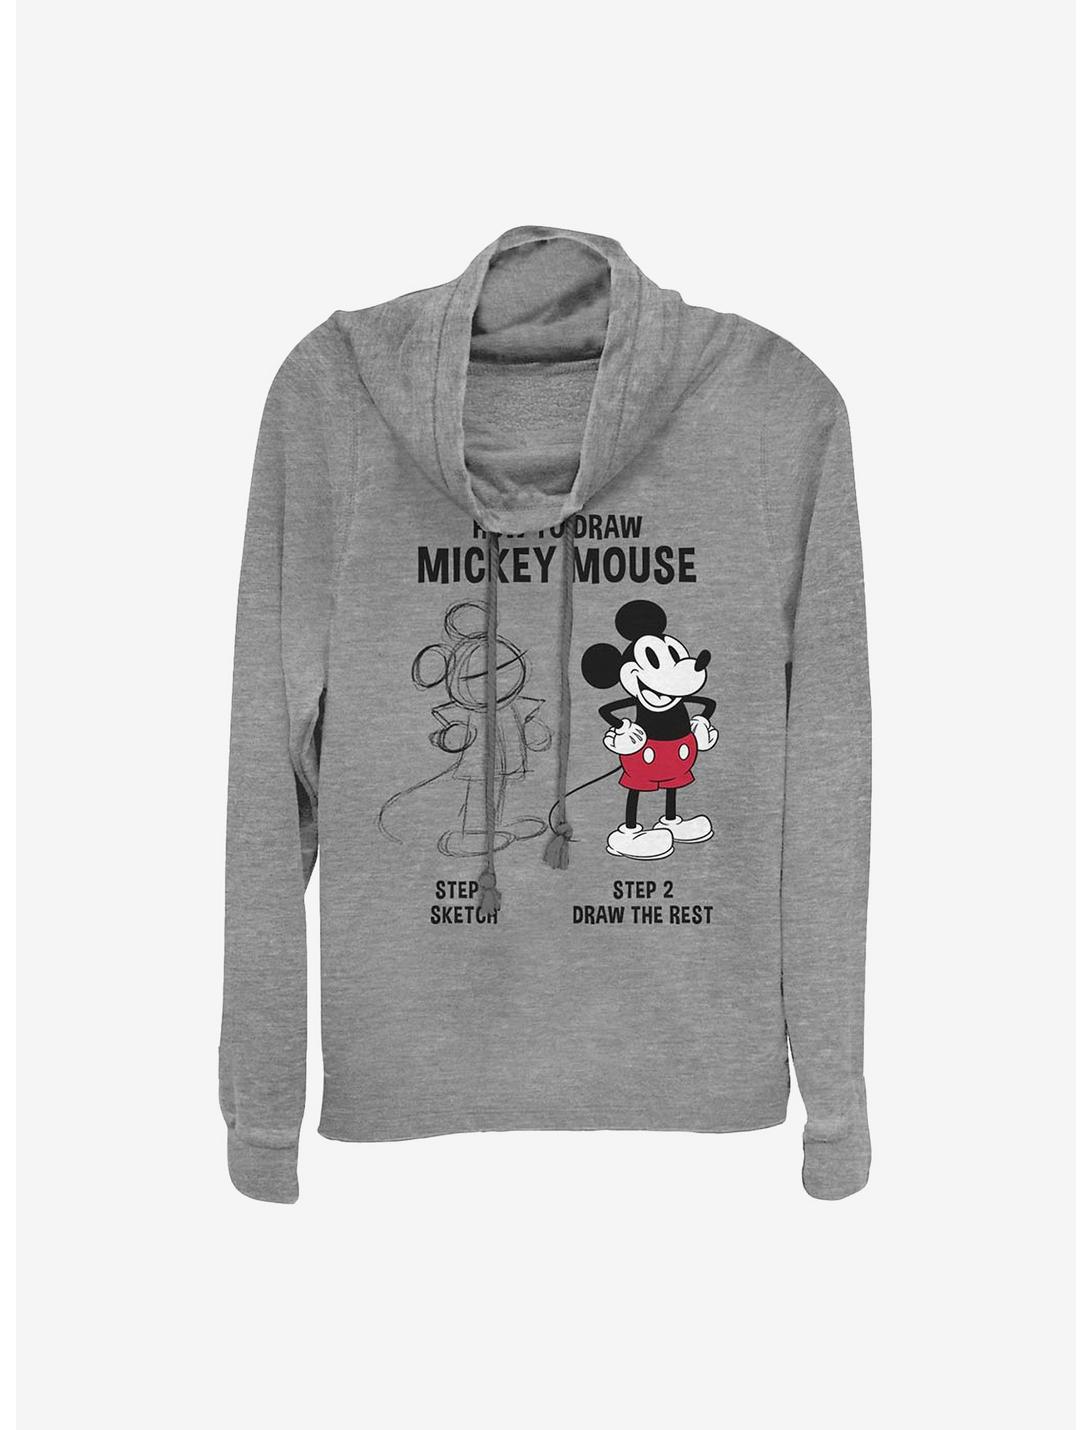 Disney Mickey Mouse Mickey Drawing Cowlneck Long-Sleeve Girls Top, GRAY HTR, hi-res